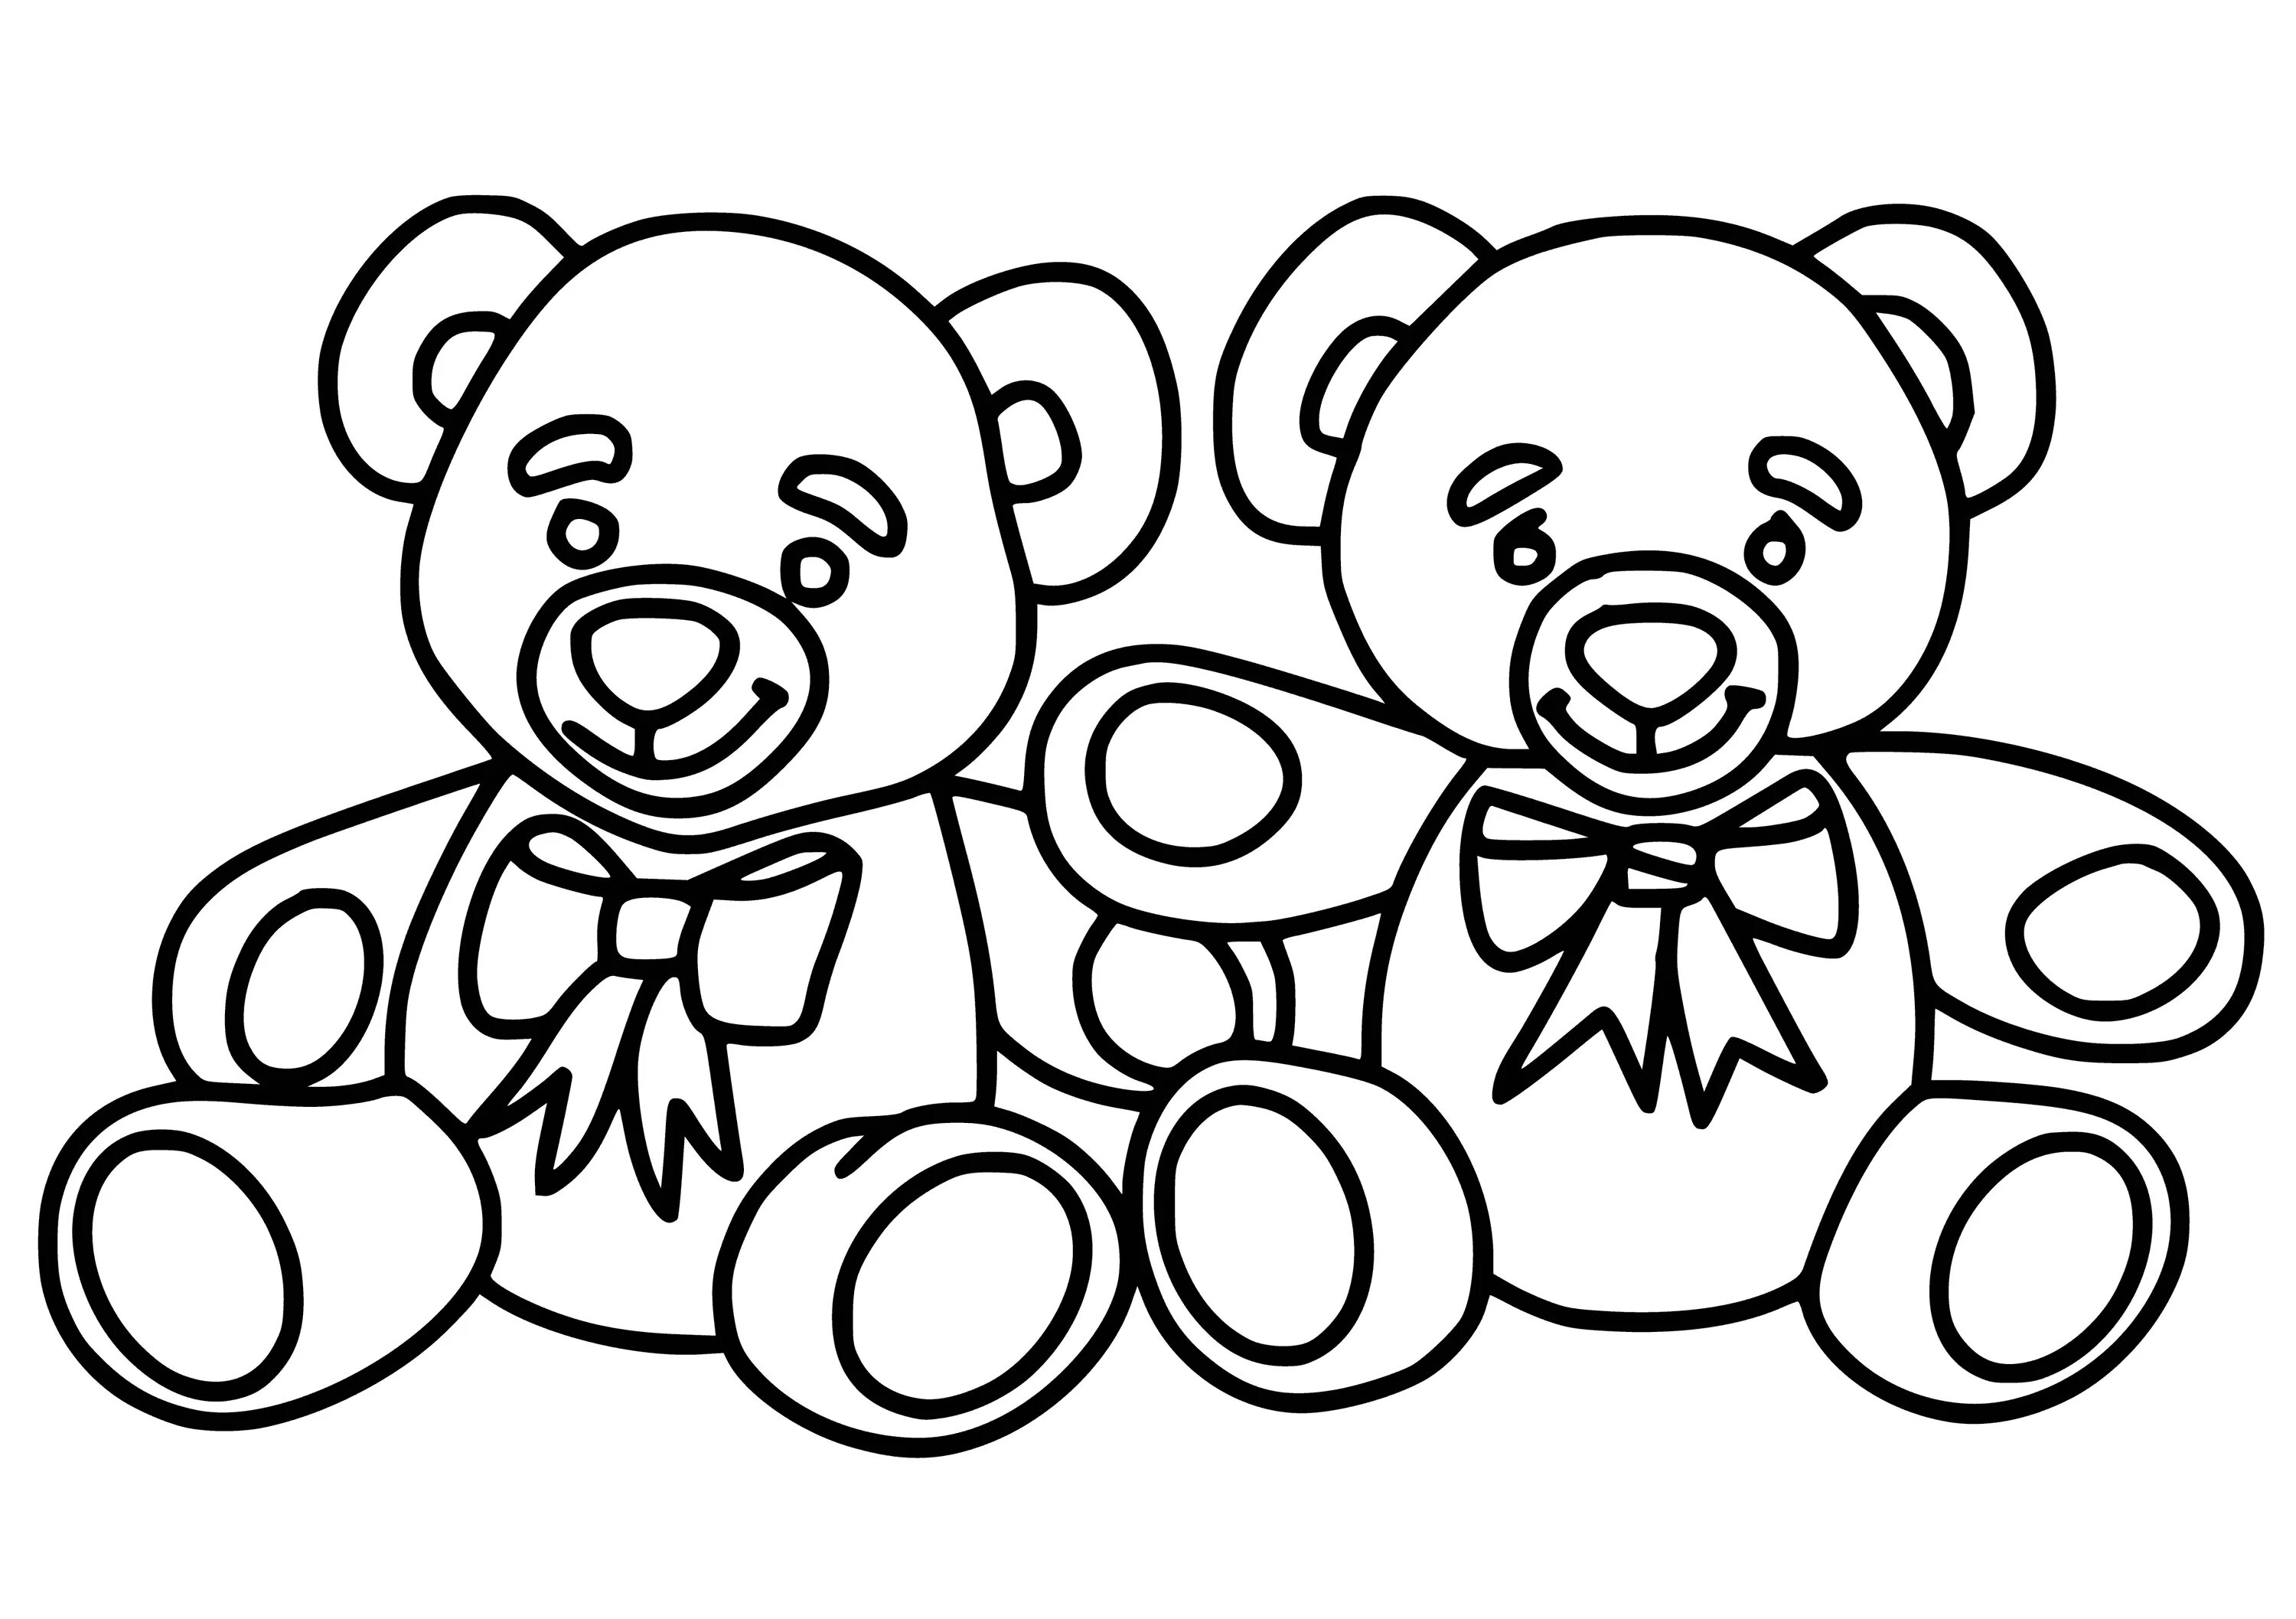 Courageous bear cub coloring page